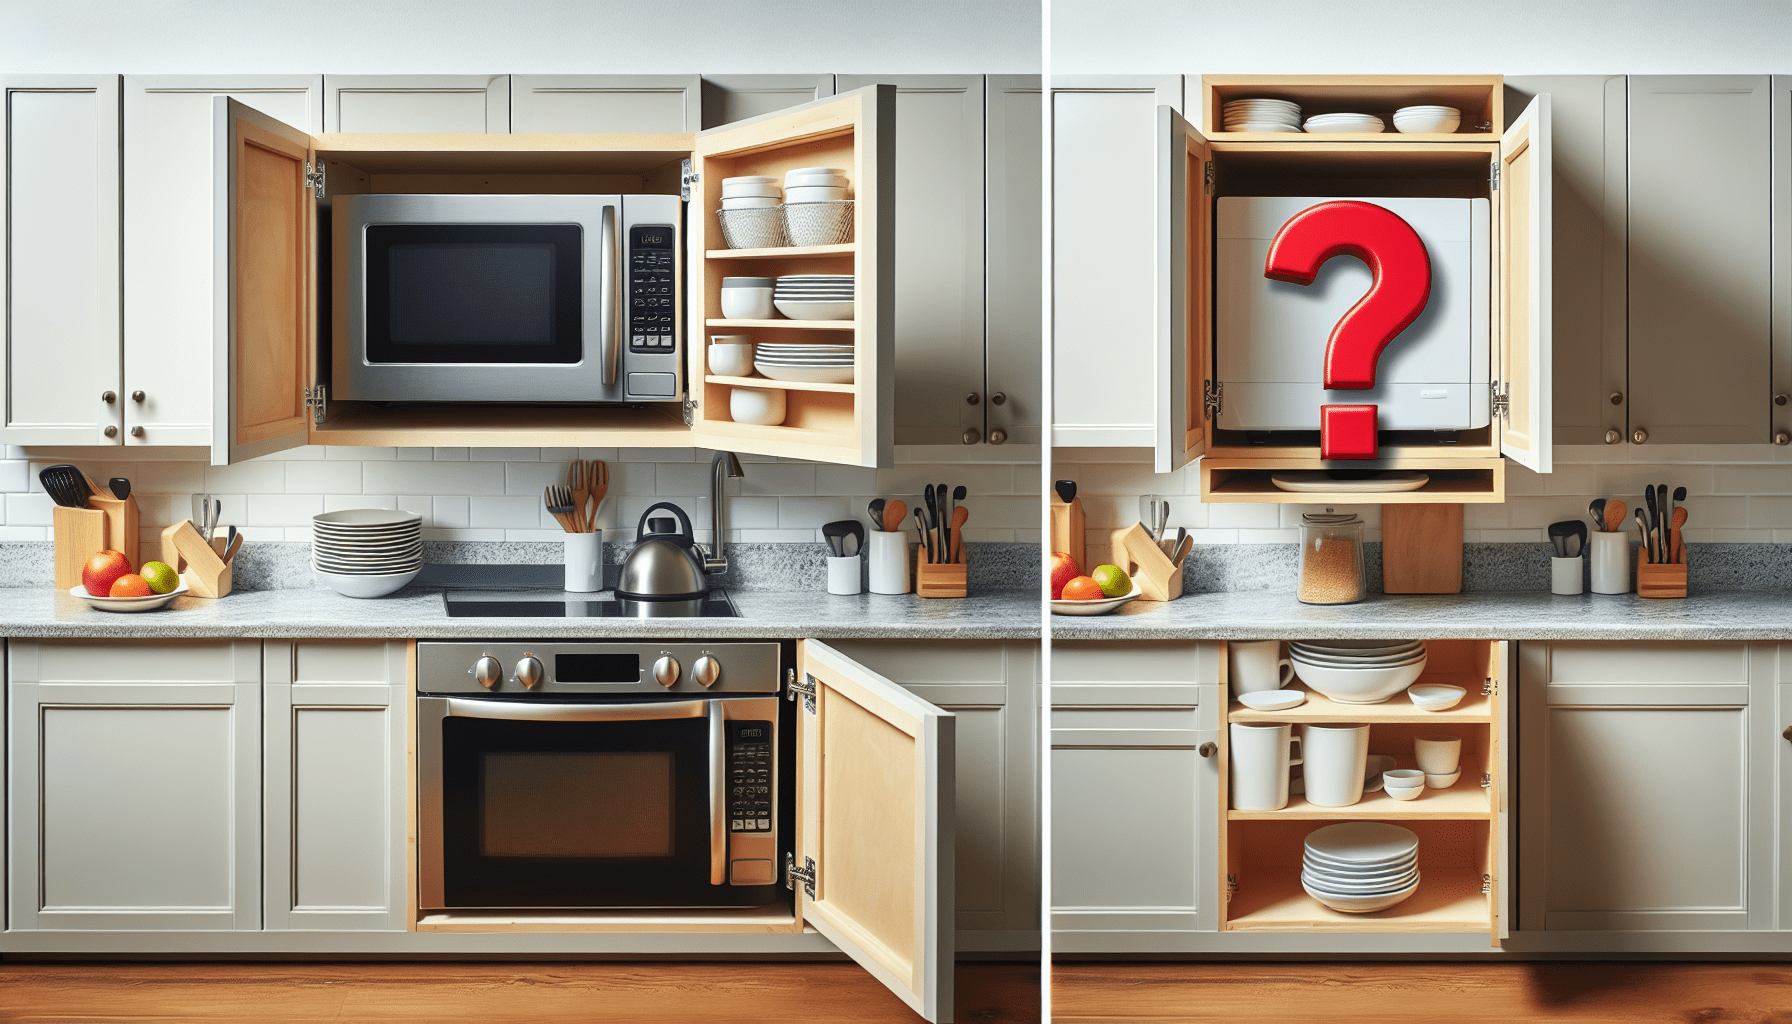 Is It Safe To Put A Countertop Microwave In A Cabinet?